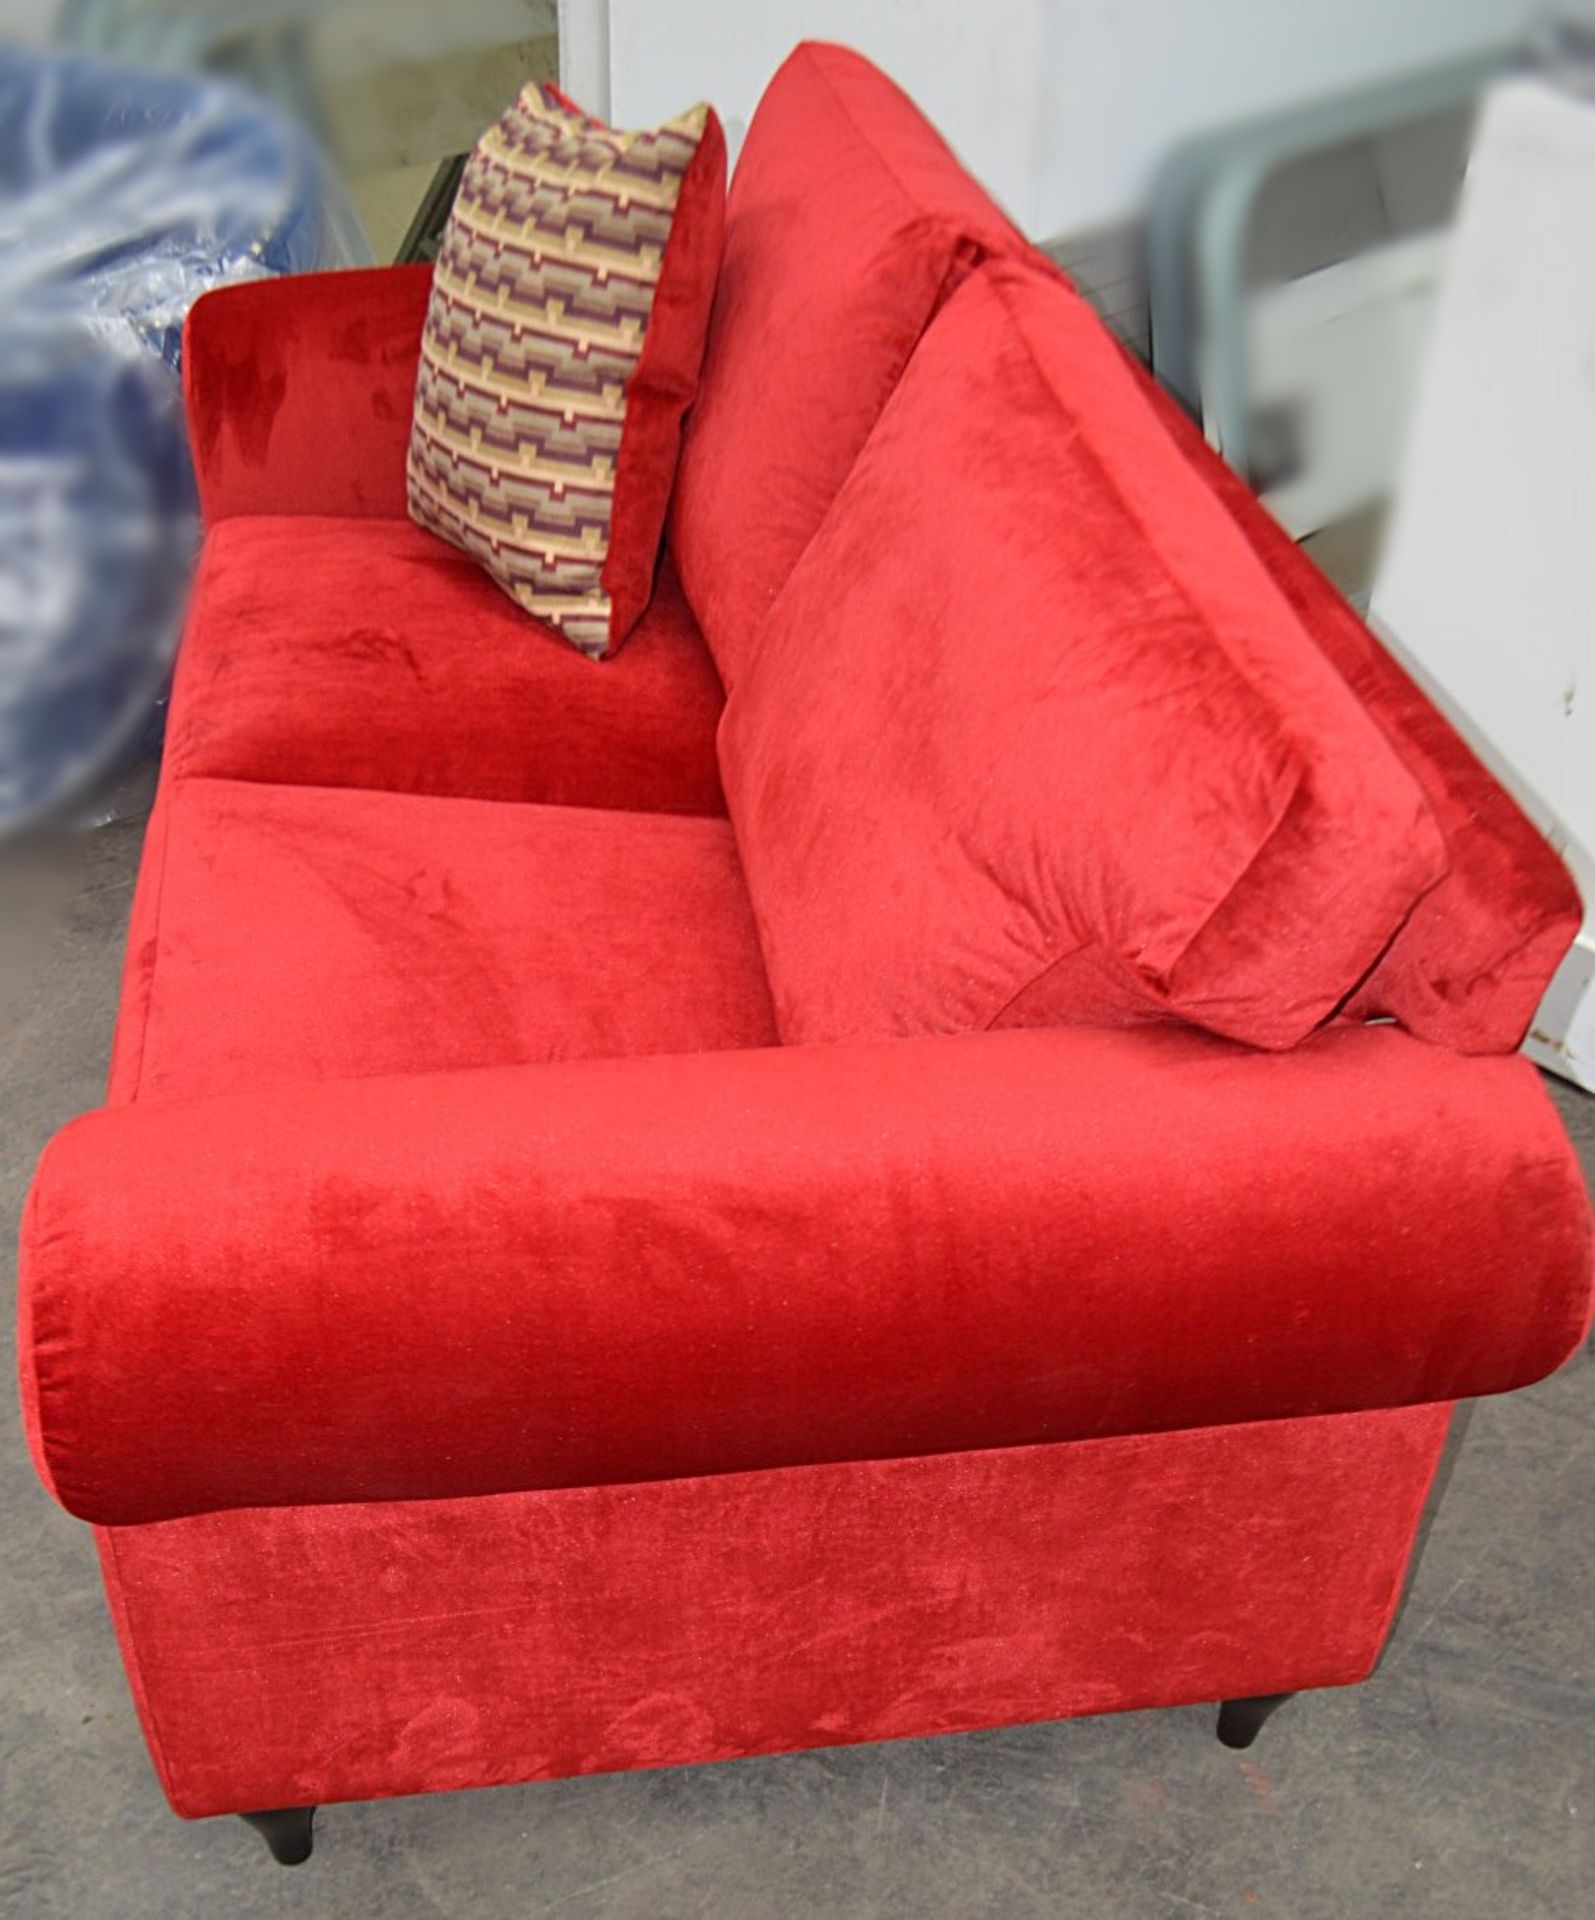 1 x Bespoke 2-Seater Commercial Sofa In A Bright Red Velvet With Complimenting Cushion - - Image 4 of 6